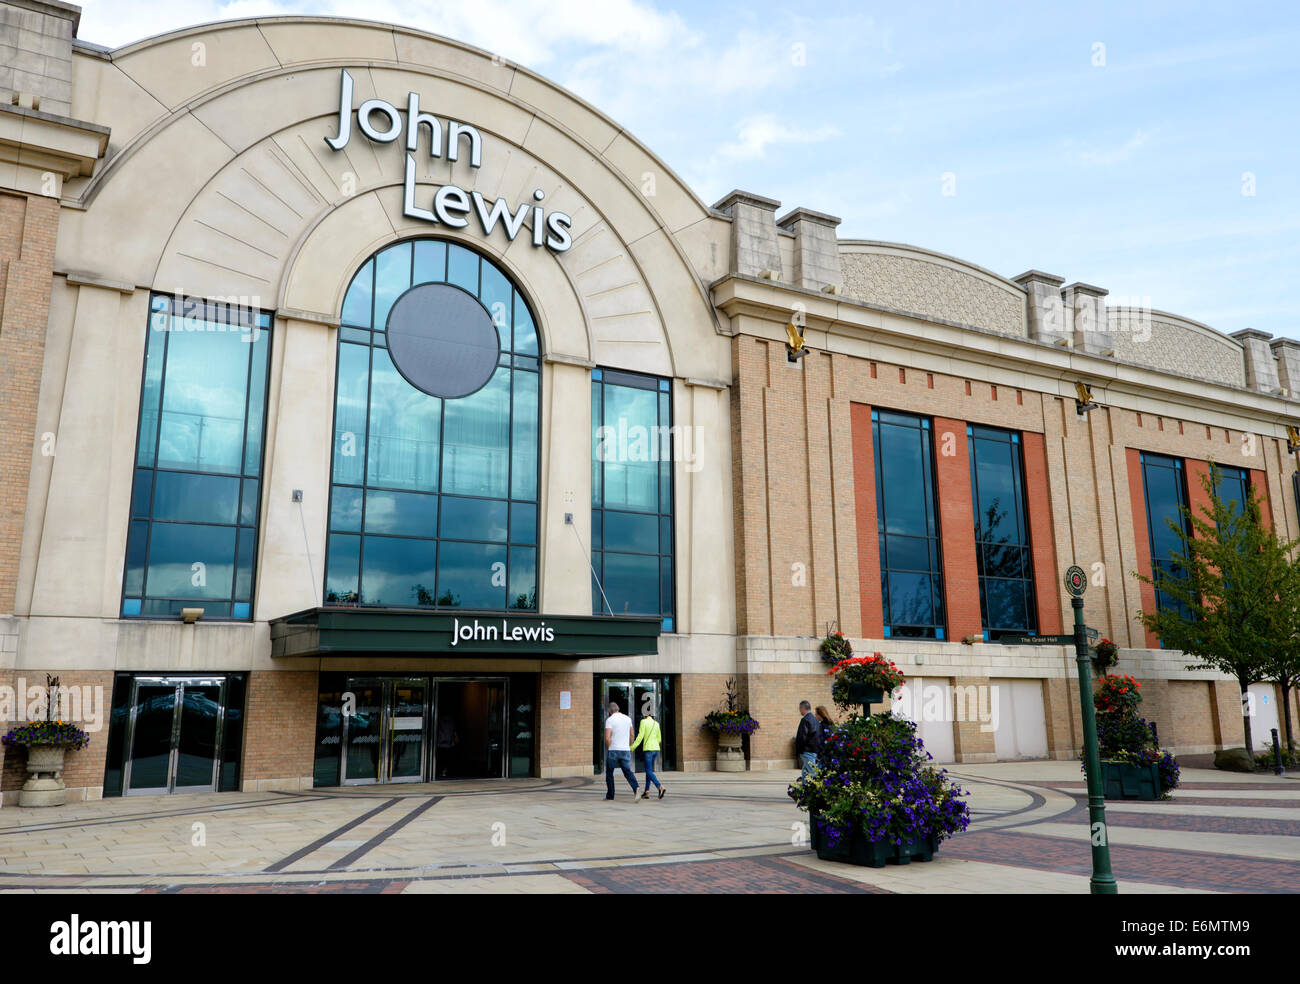 Entrance to the John Lewis department store in the Trafford Centre, Manchester, England, UK Stock Photo